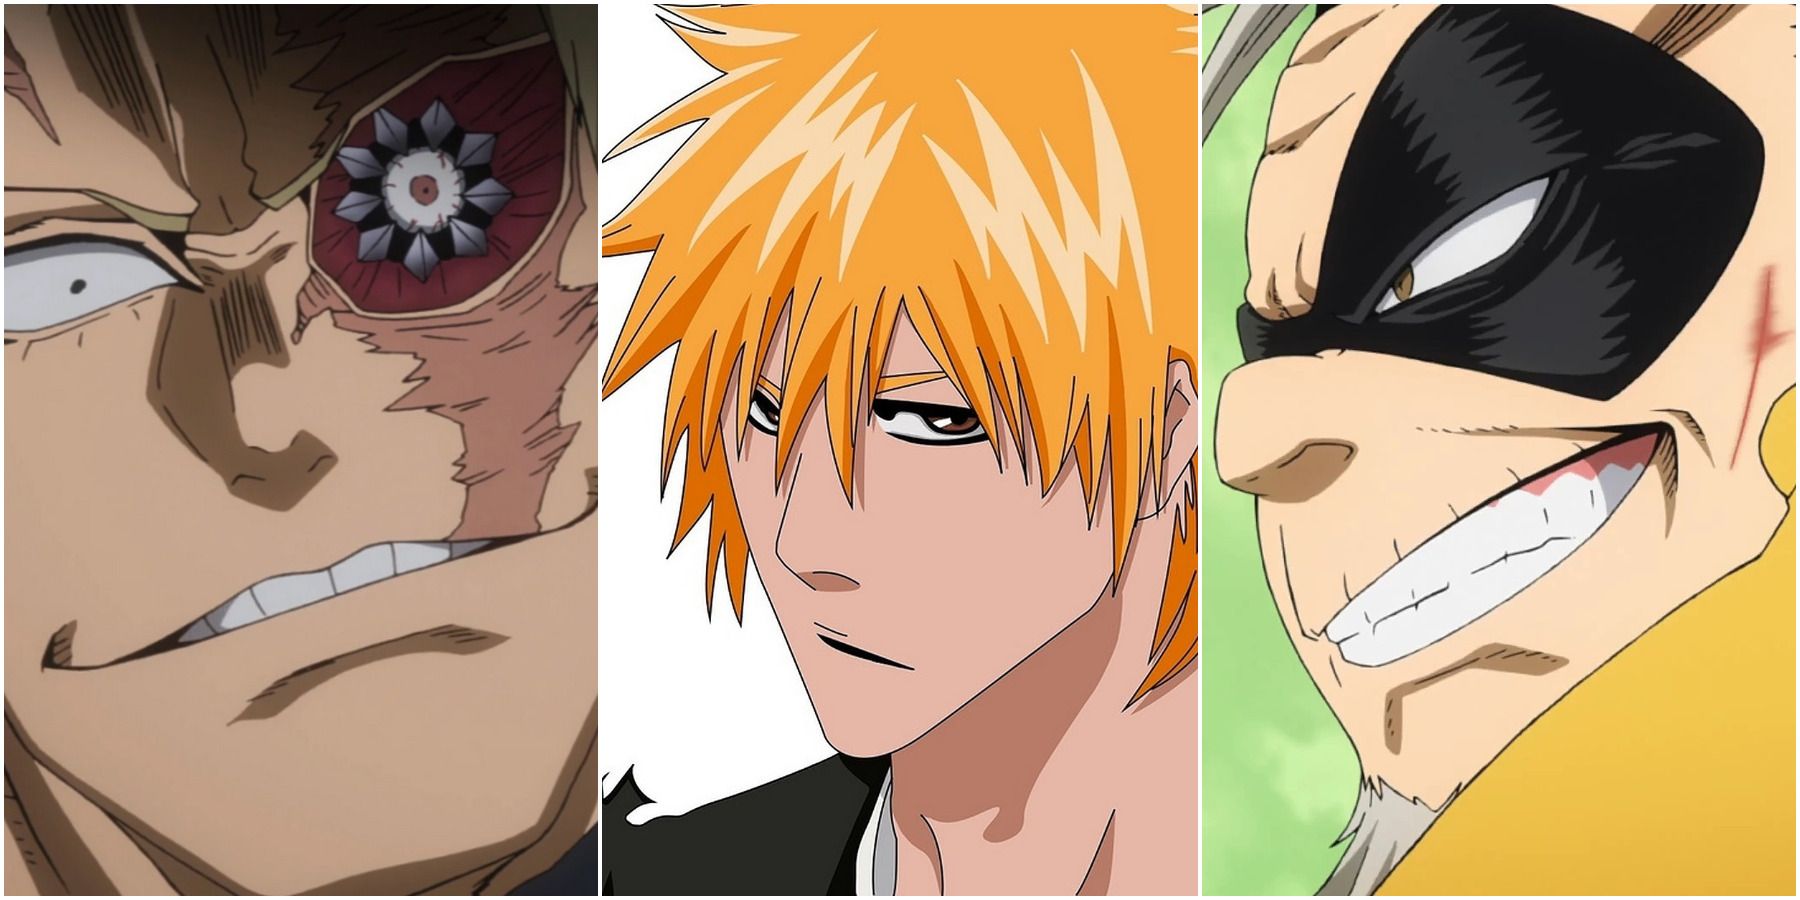 5 anime characters who can defeat Ichigo from Bleach (and 5 who don't stand  a chance)